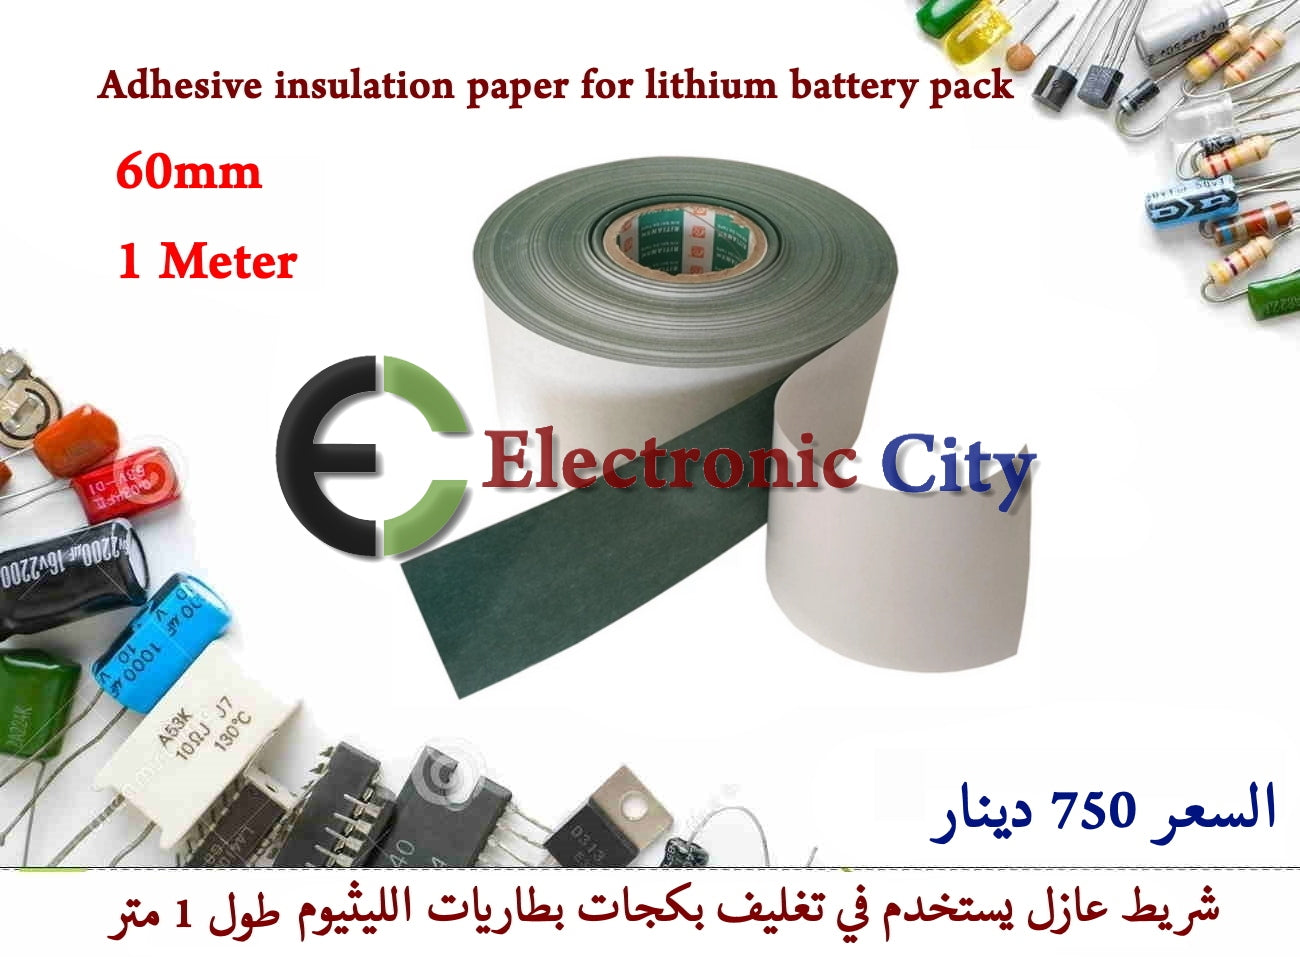 Adhesive insulation paper for lithium battery pack 60mm 1M